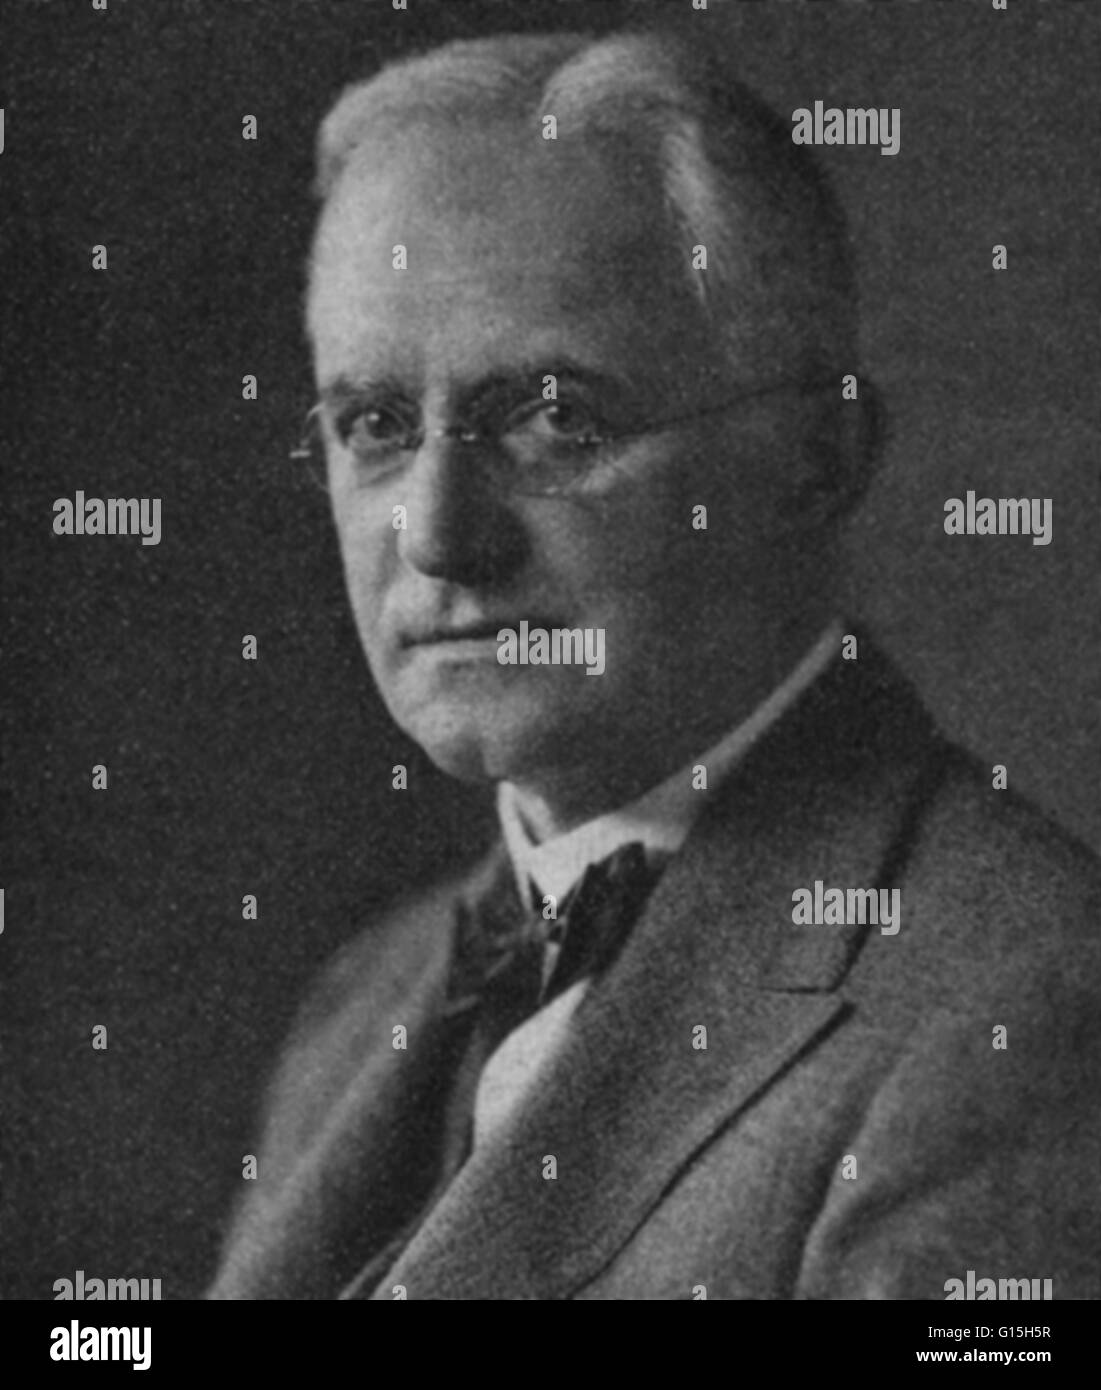 George Eastman (July 12, 1854 - March 14, 1932) was an American innovator and entrepreneur who founded the Eastman Kodak Company and invented roll film, helping to bring photography to the mainstream. In 1884, Eastman patented the first film in roll form. Stock Photo